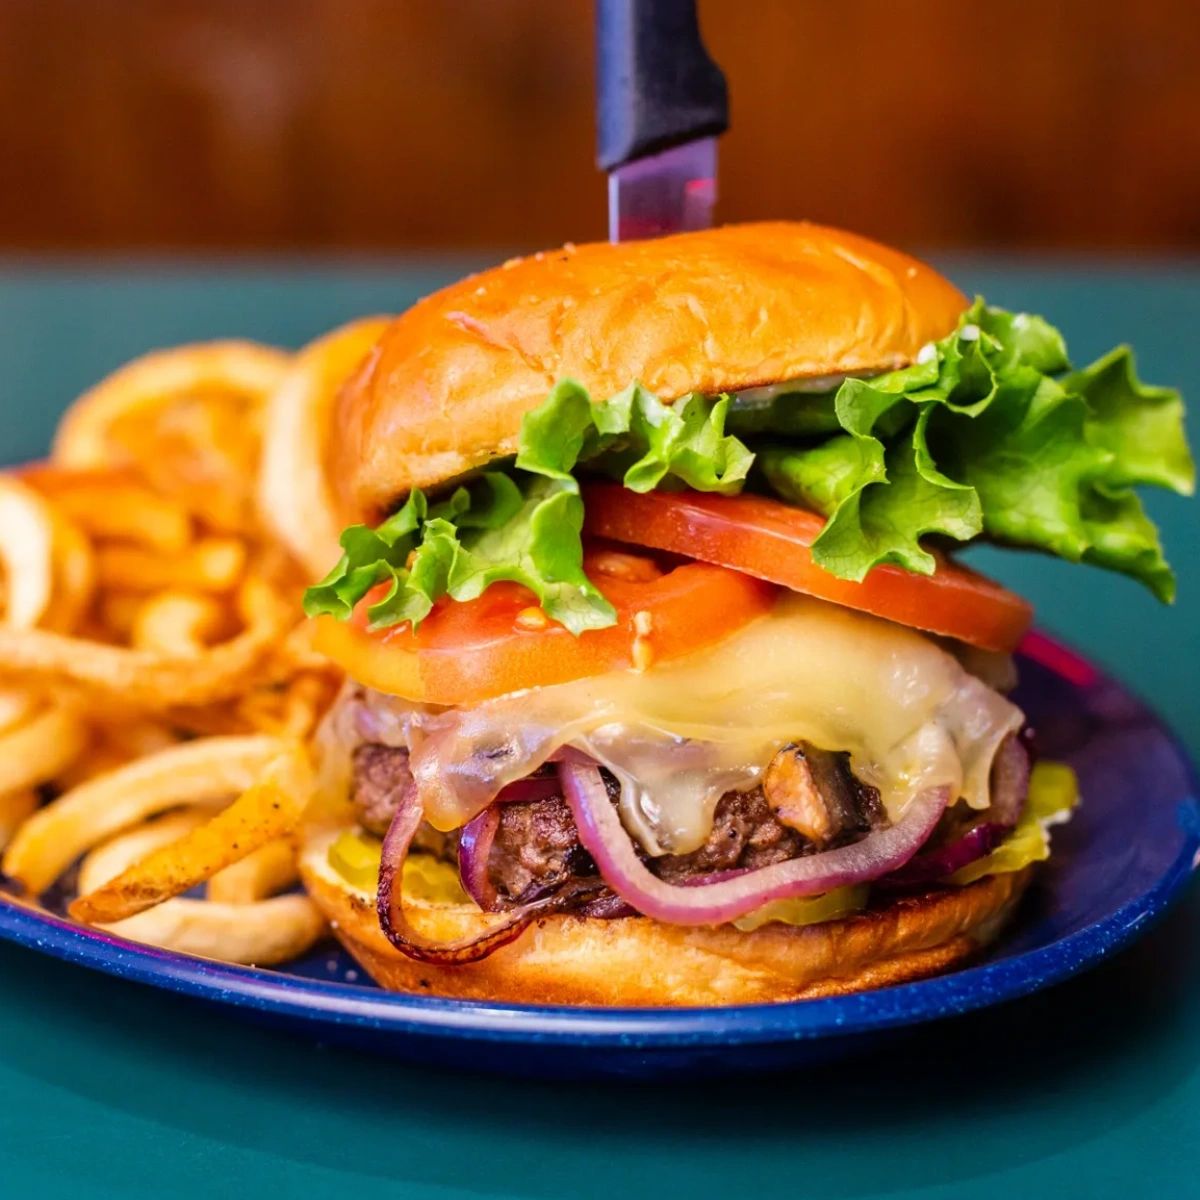 Hungry? Let us satiate that hunger with our juicy cheeseburgers and crispy fries! #AustinEats